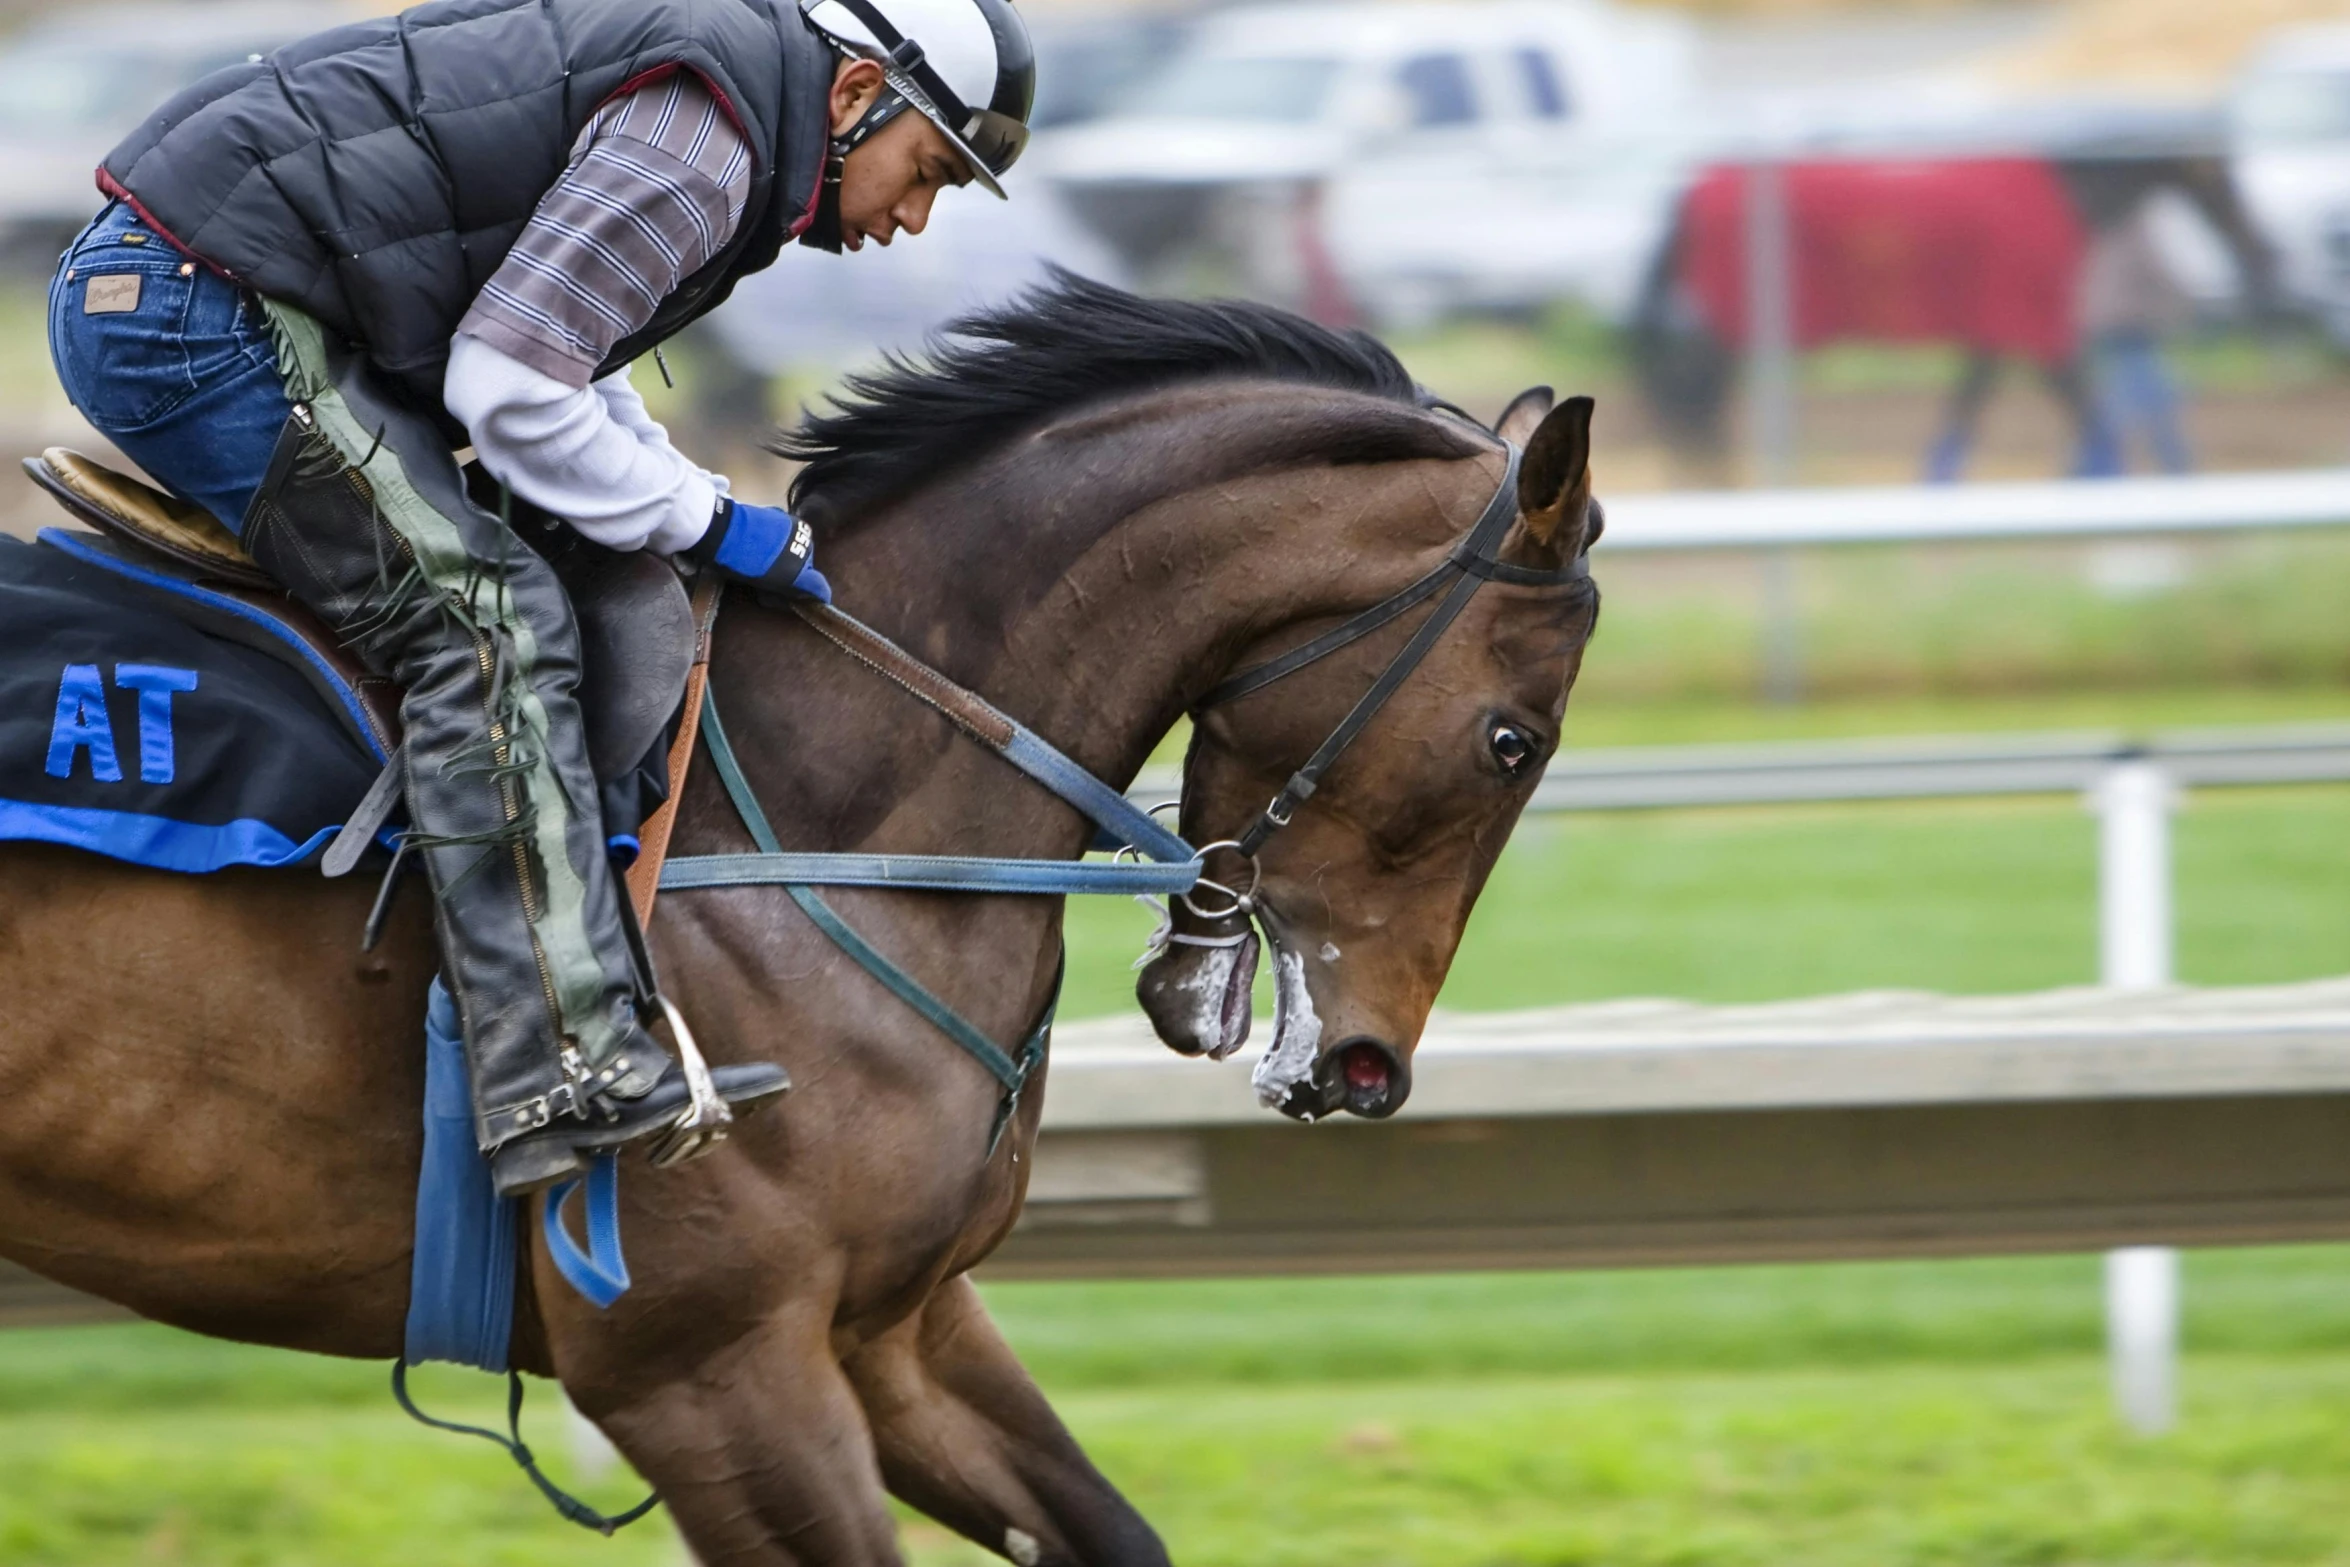 a man riding on the back of a brown horse, pexels contest winner, on a racetrack, wellington, thumbnail, profile image